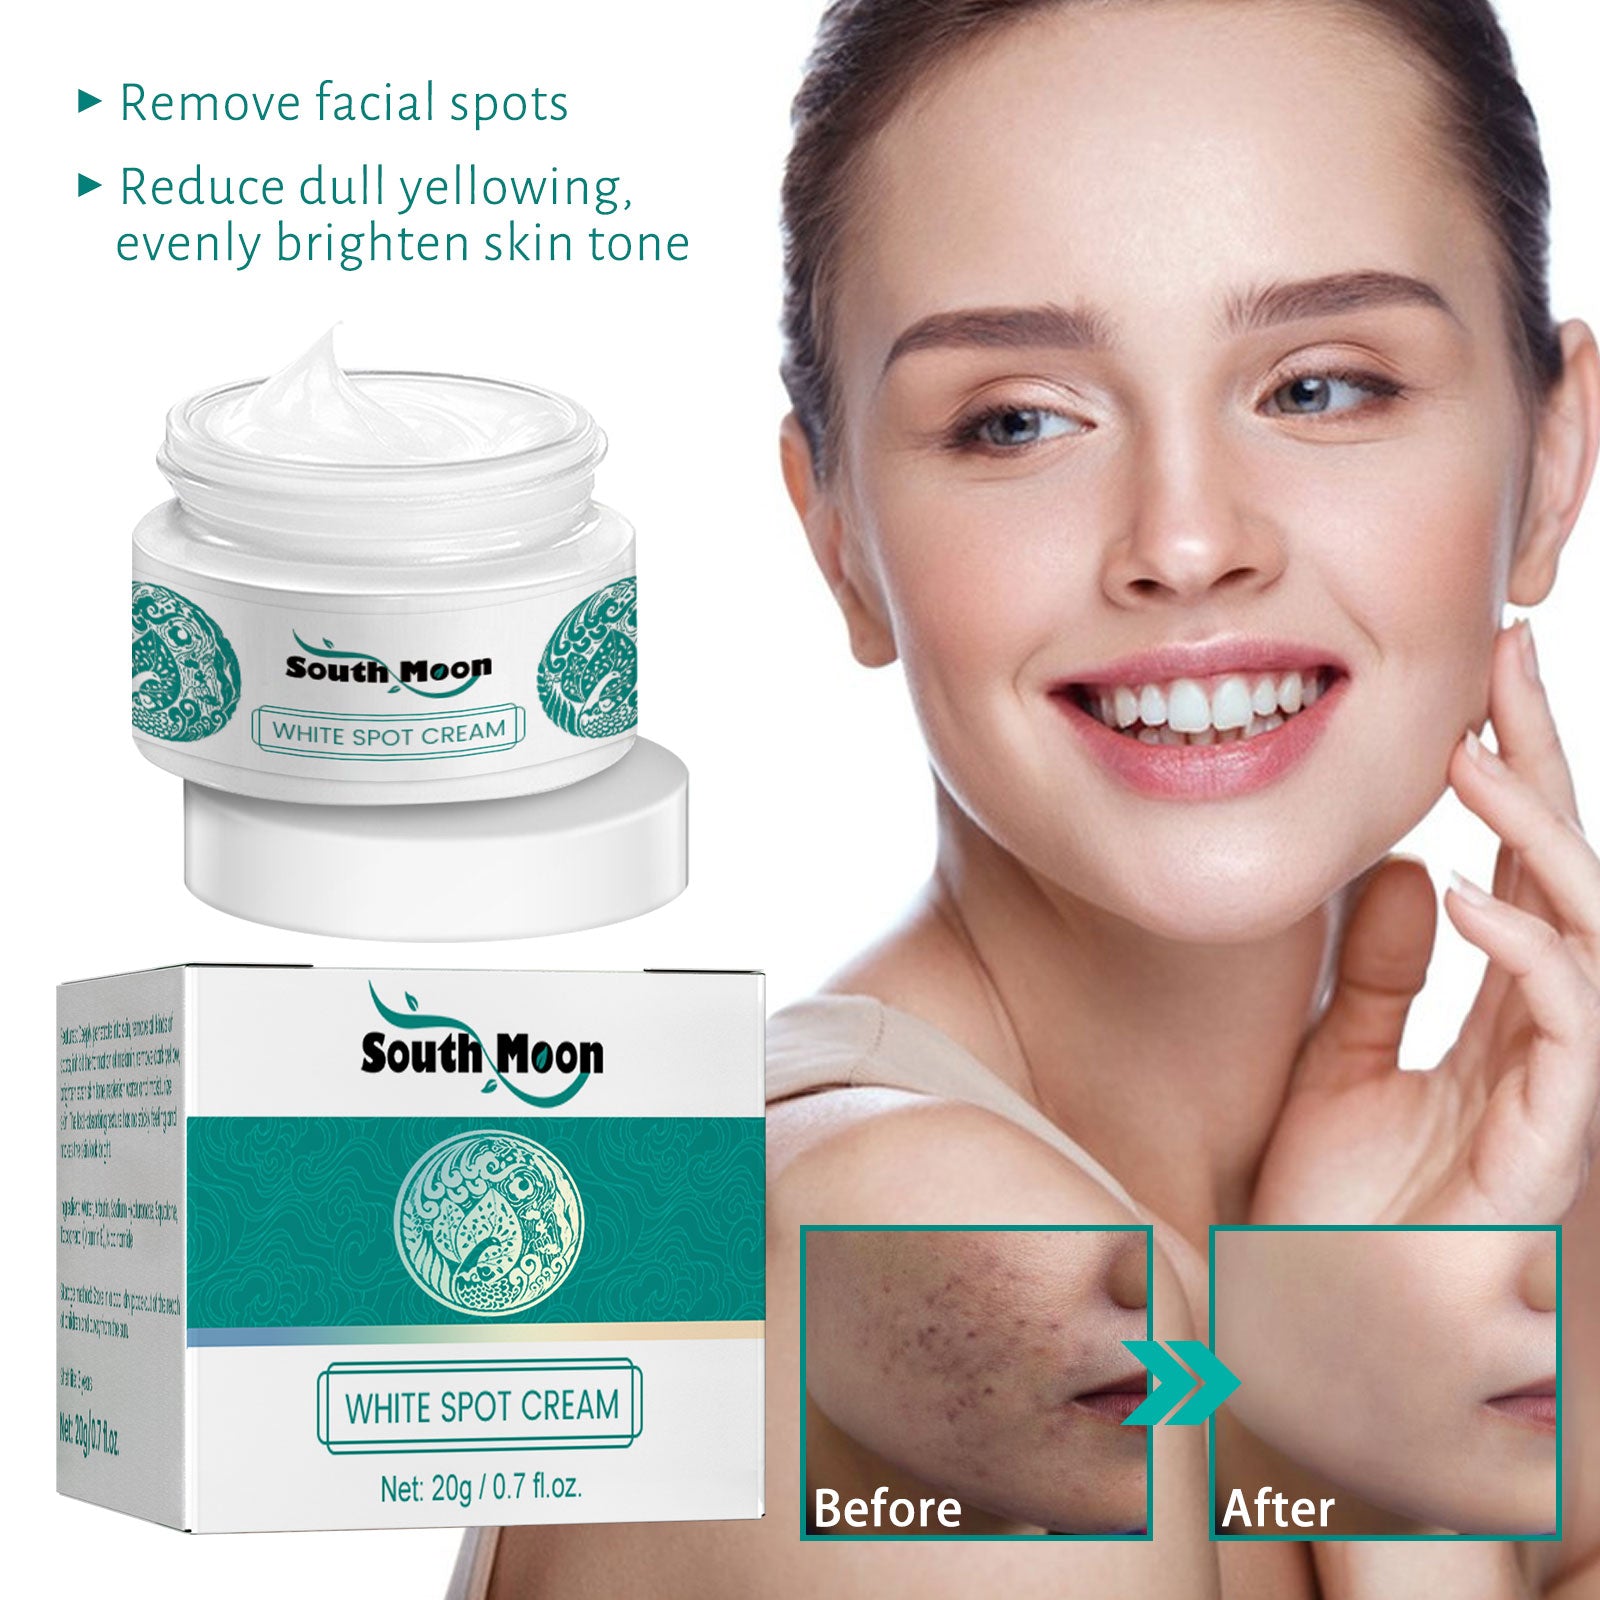 South Moon Brightening and Fading Spot Cream Moisturizing, Whitening, Firming, Fine Lines and Fading Spots Beauty Cream